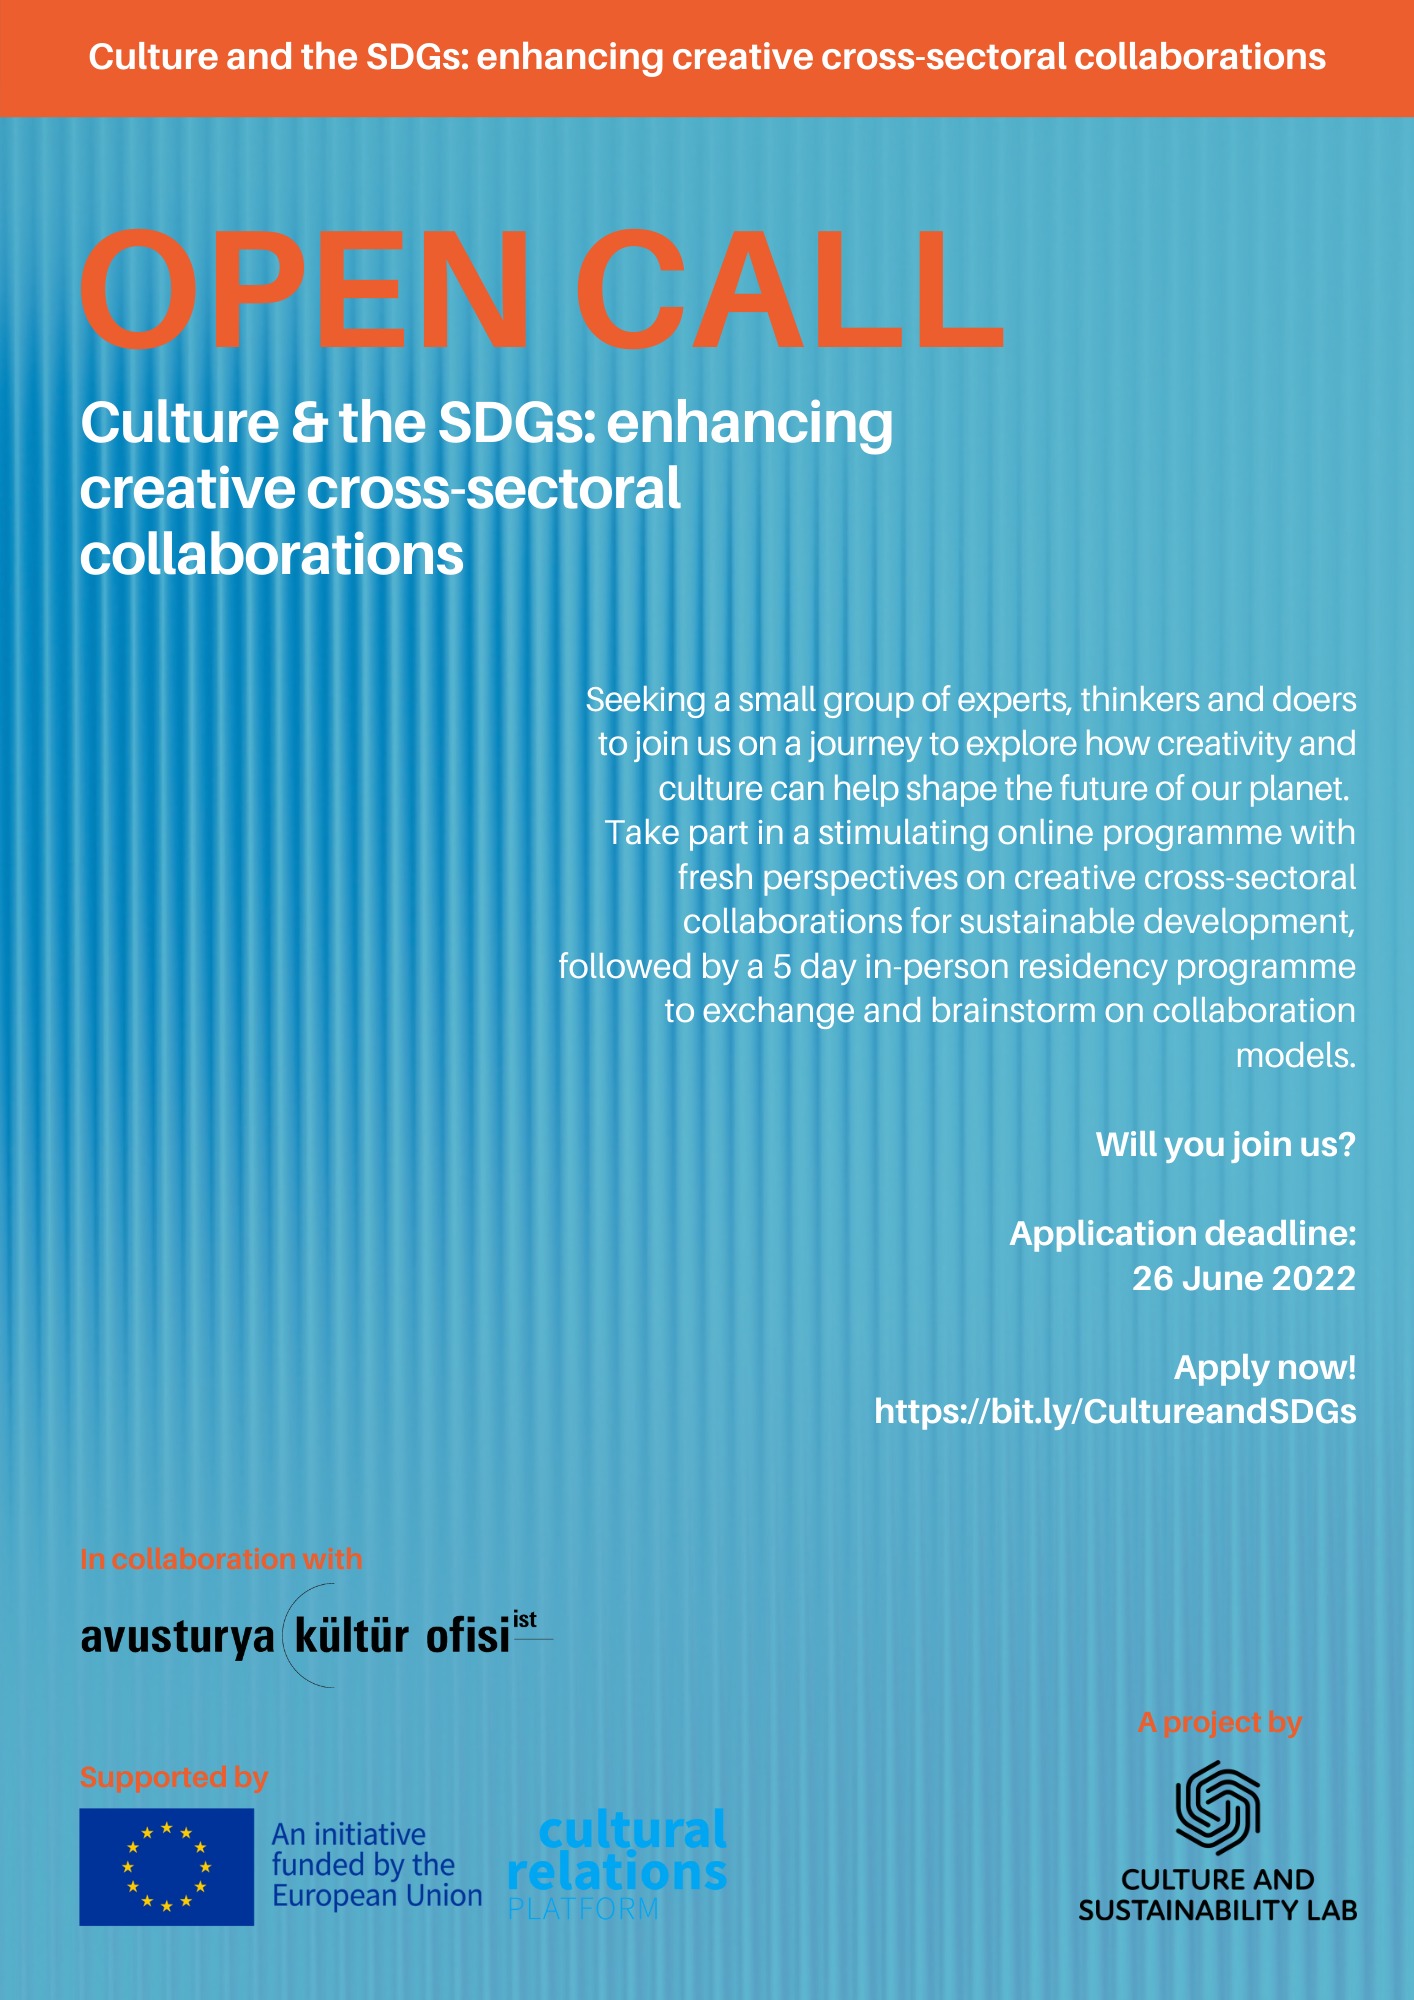 Culture and sustainability lab call for participants